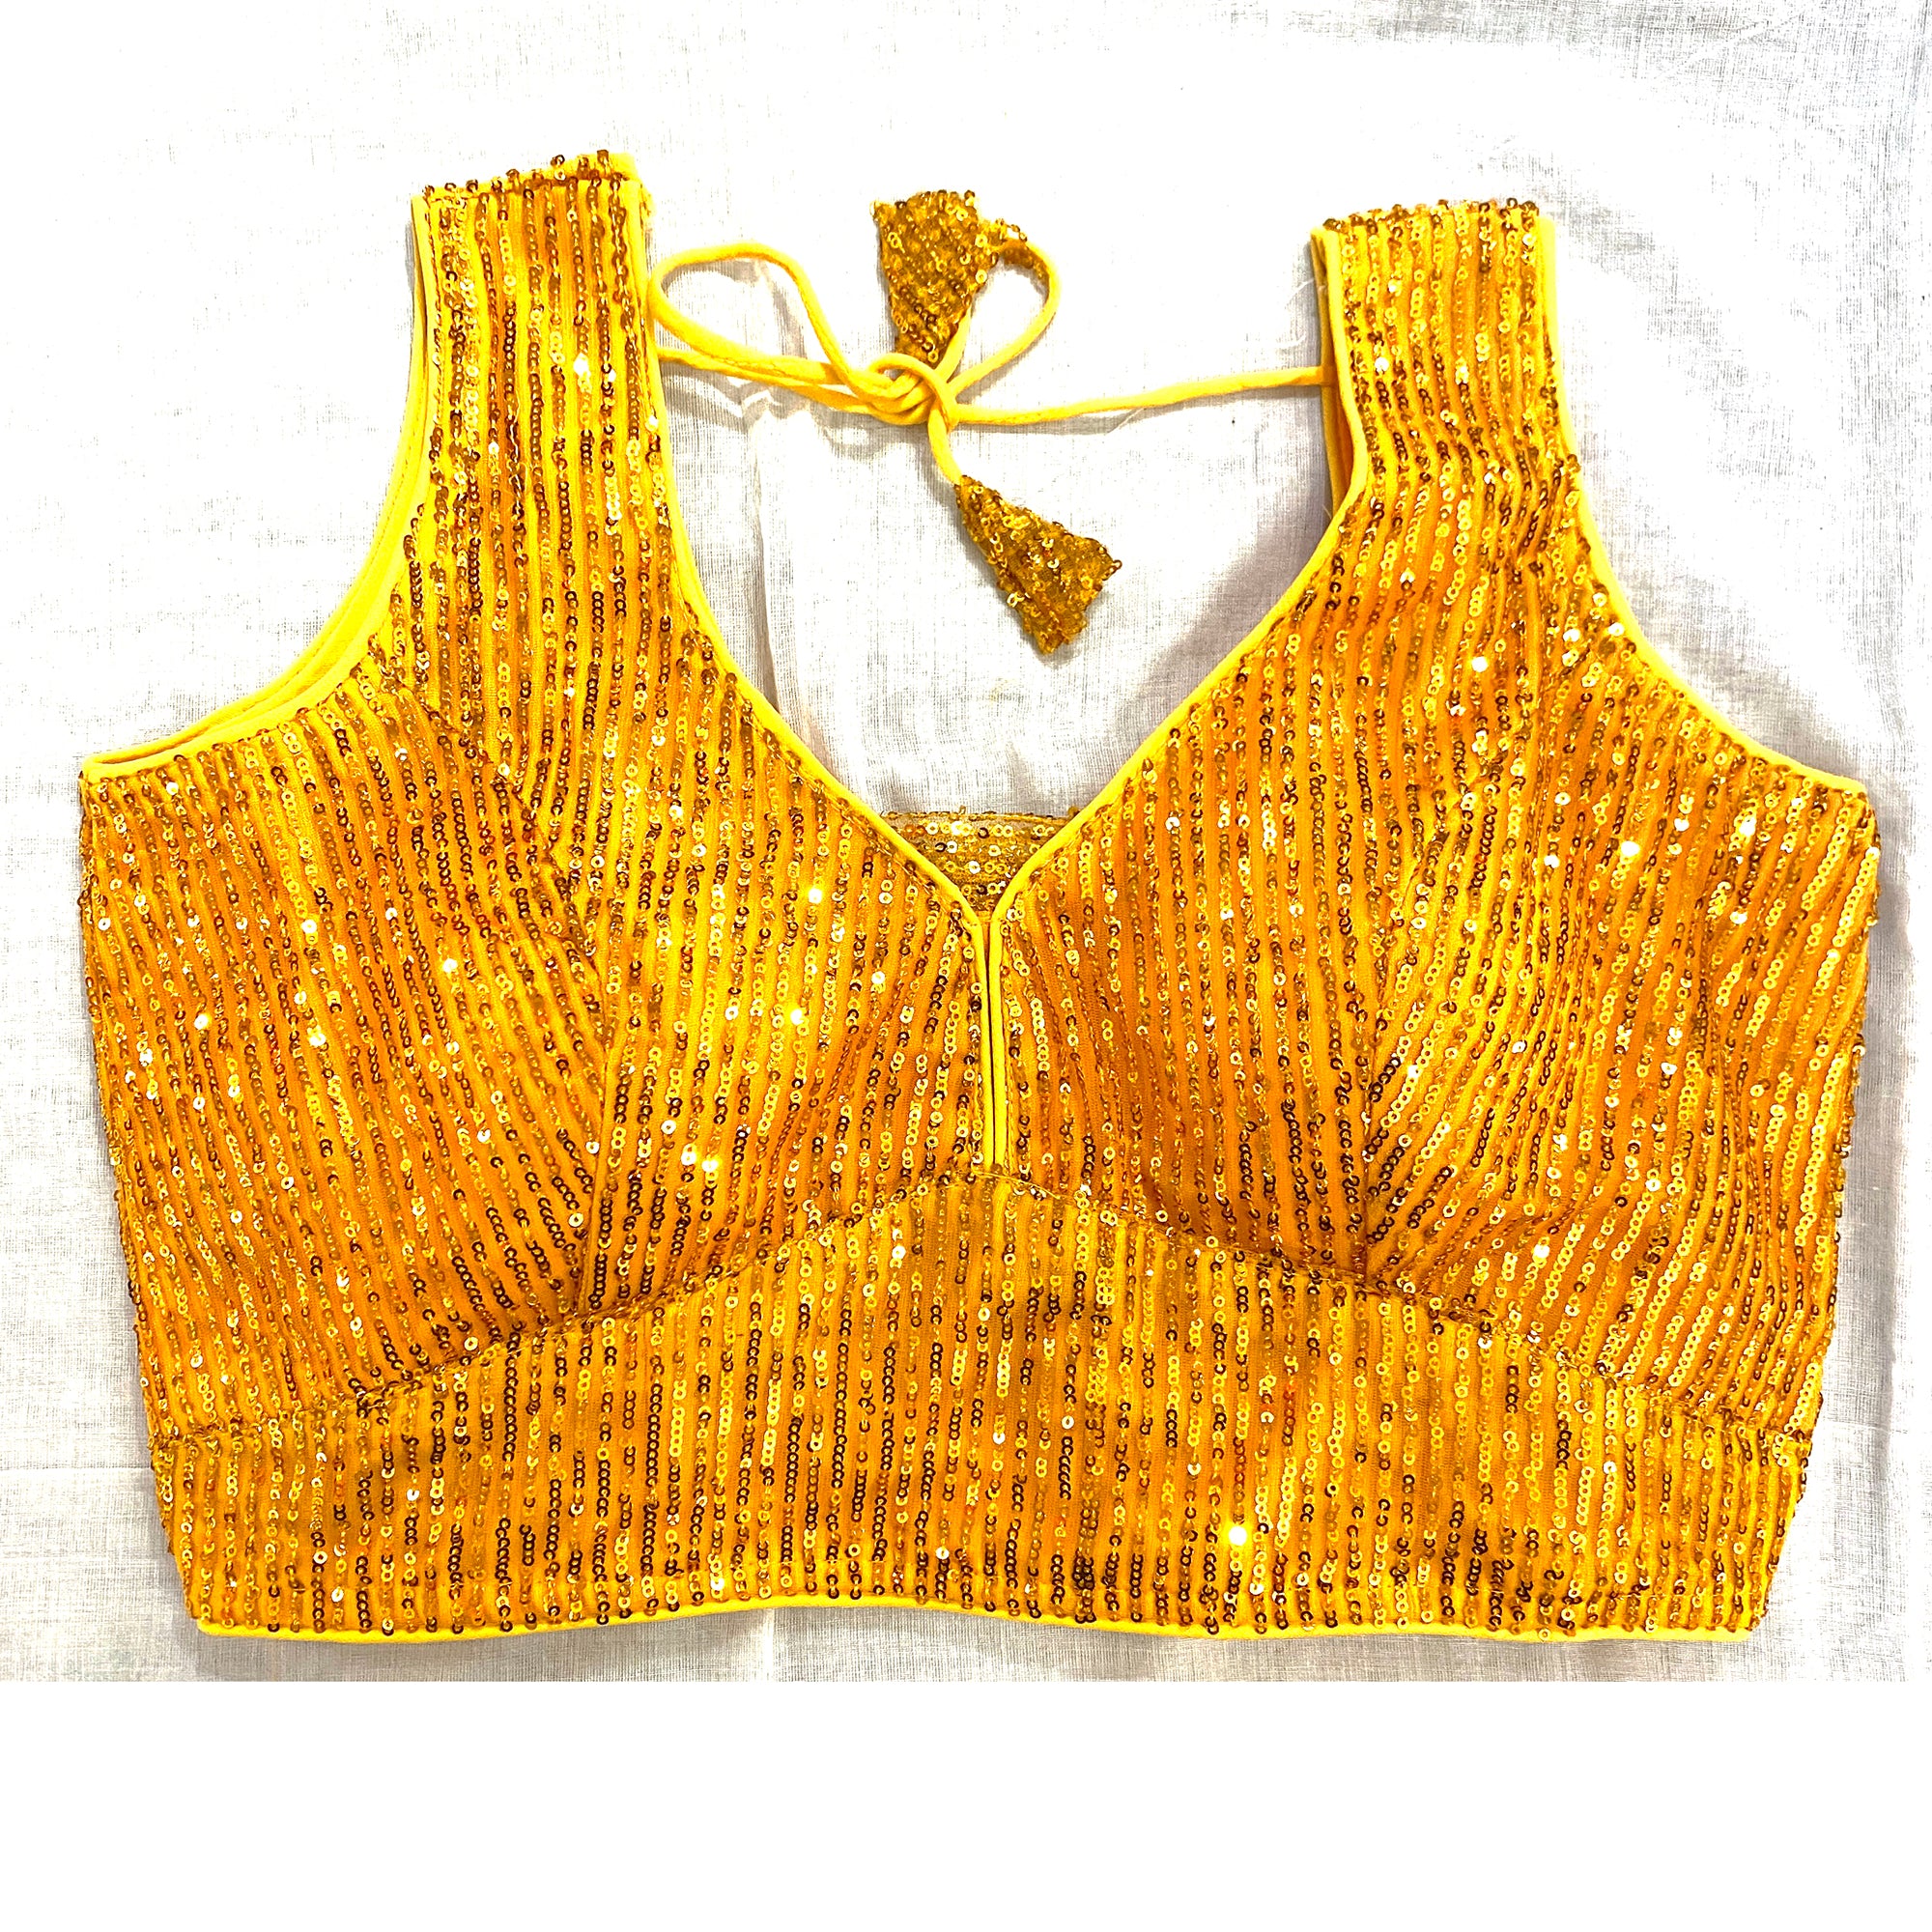 Sequin Choli Blouses-10 Colors - Vintage India NYC